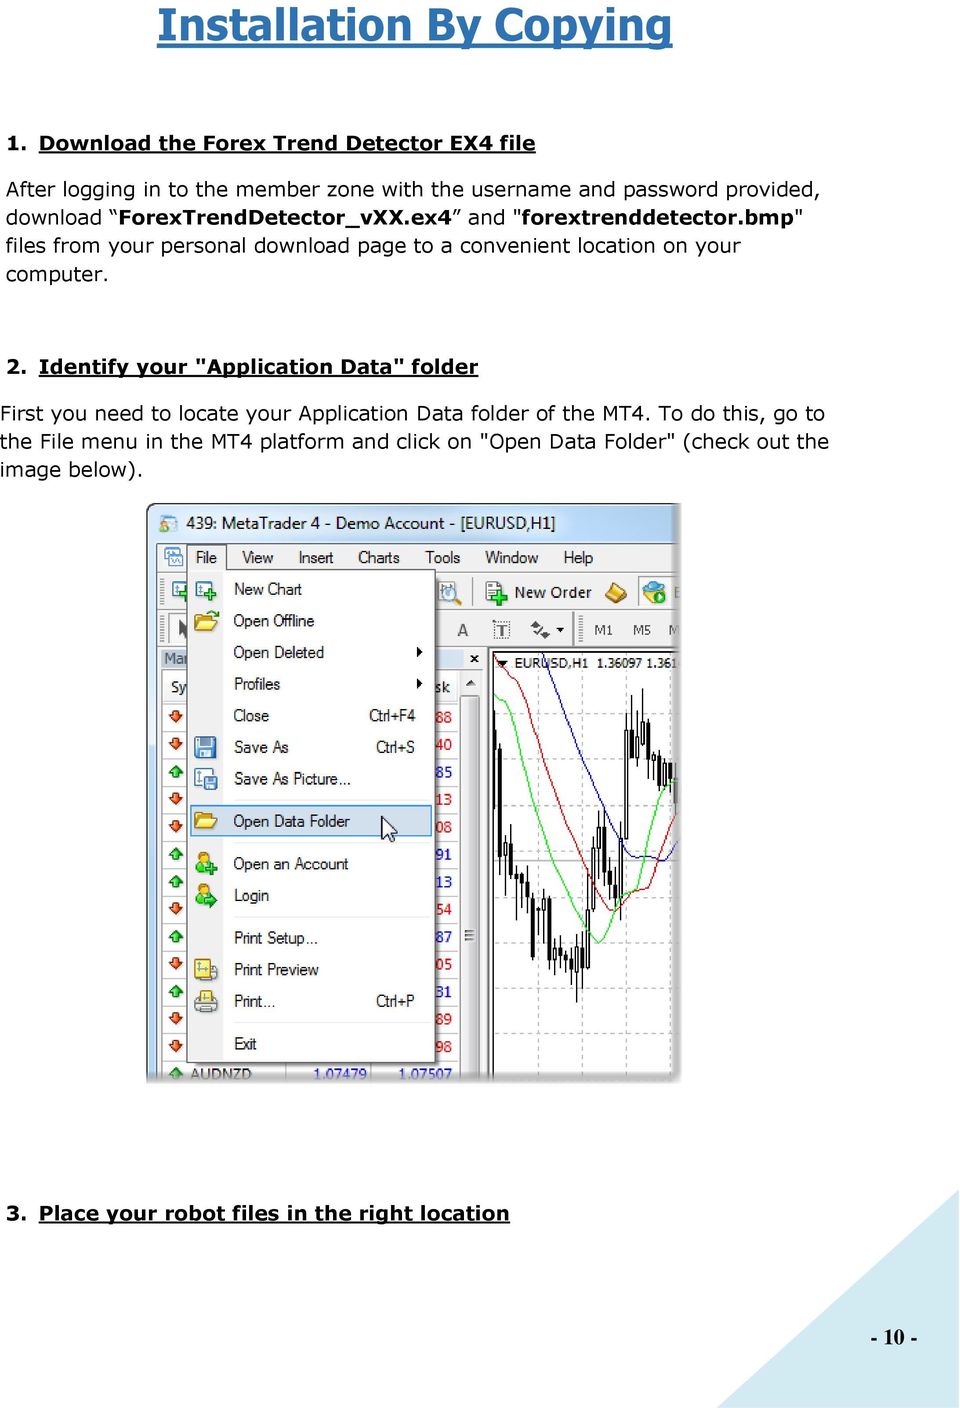 ForexTrendDetector_vXX.ex4 and "forextrenddetector.bmp" files from your personal download page to a convenient location on your computer. 2.